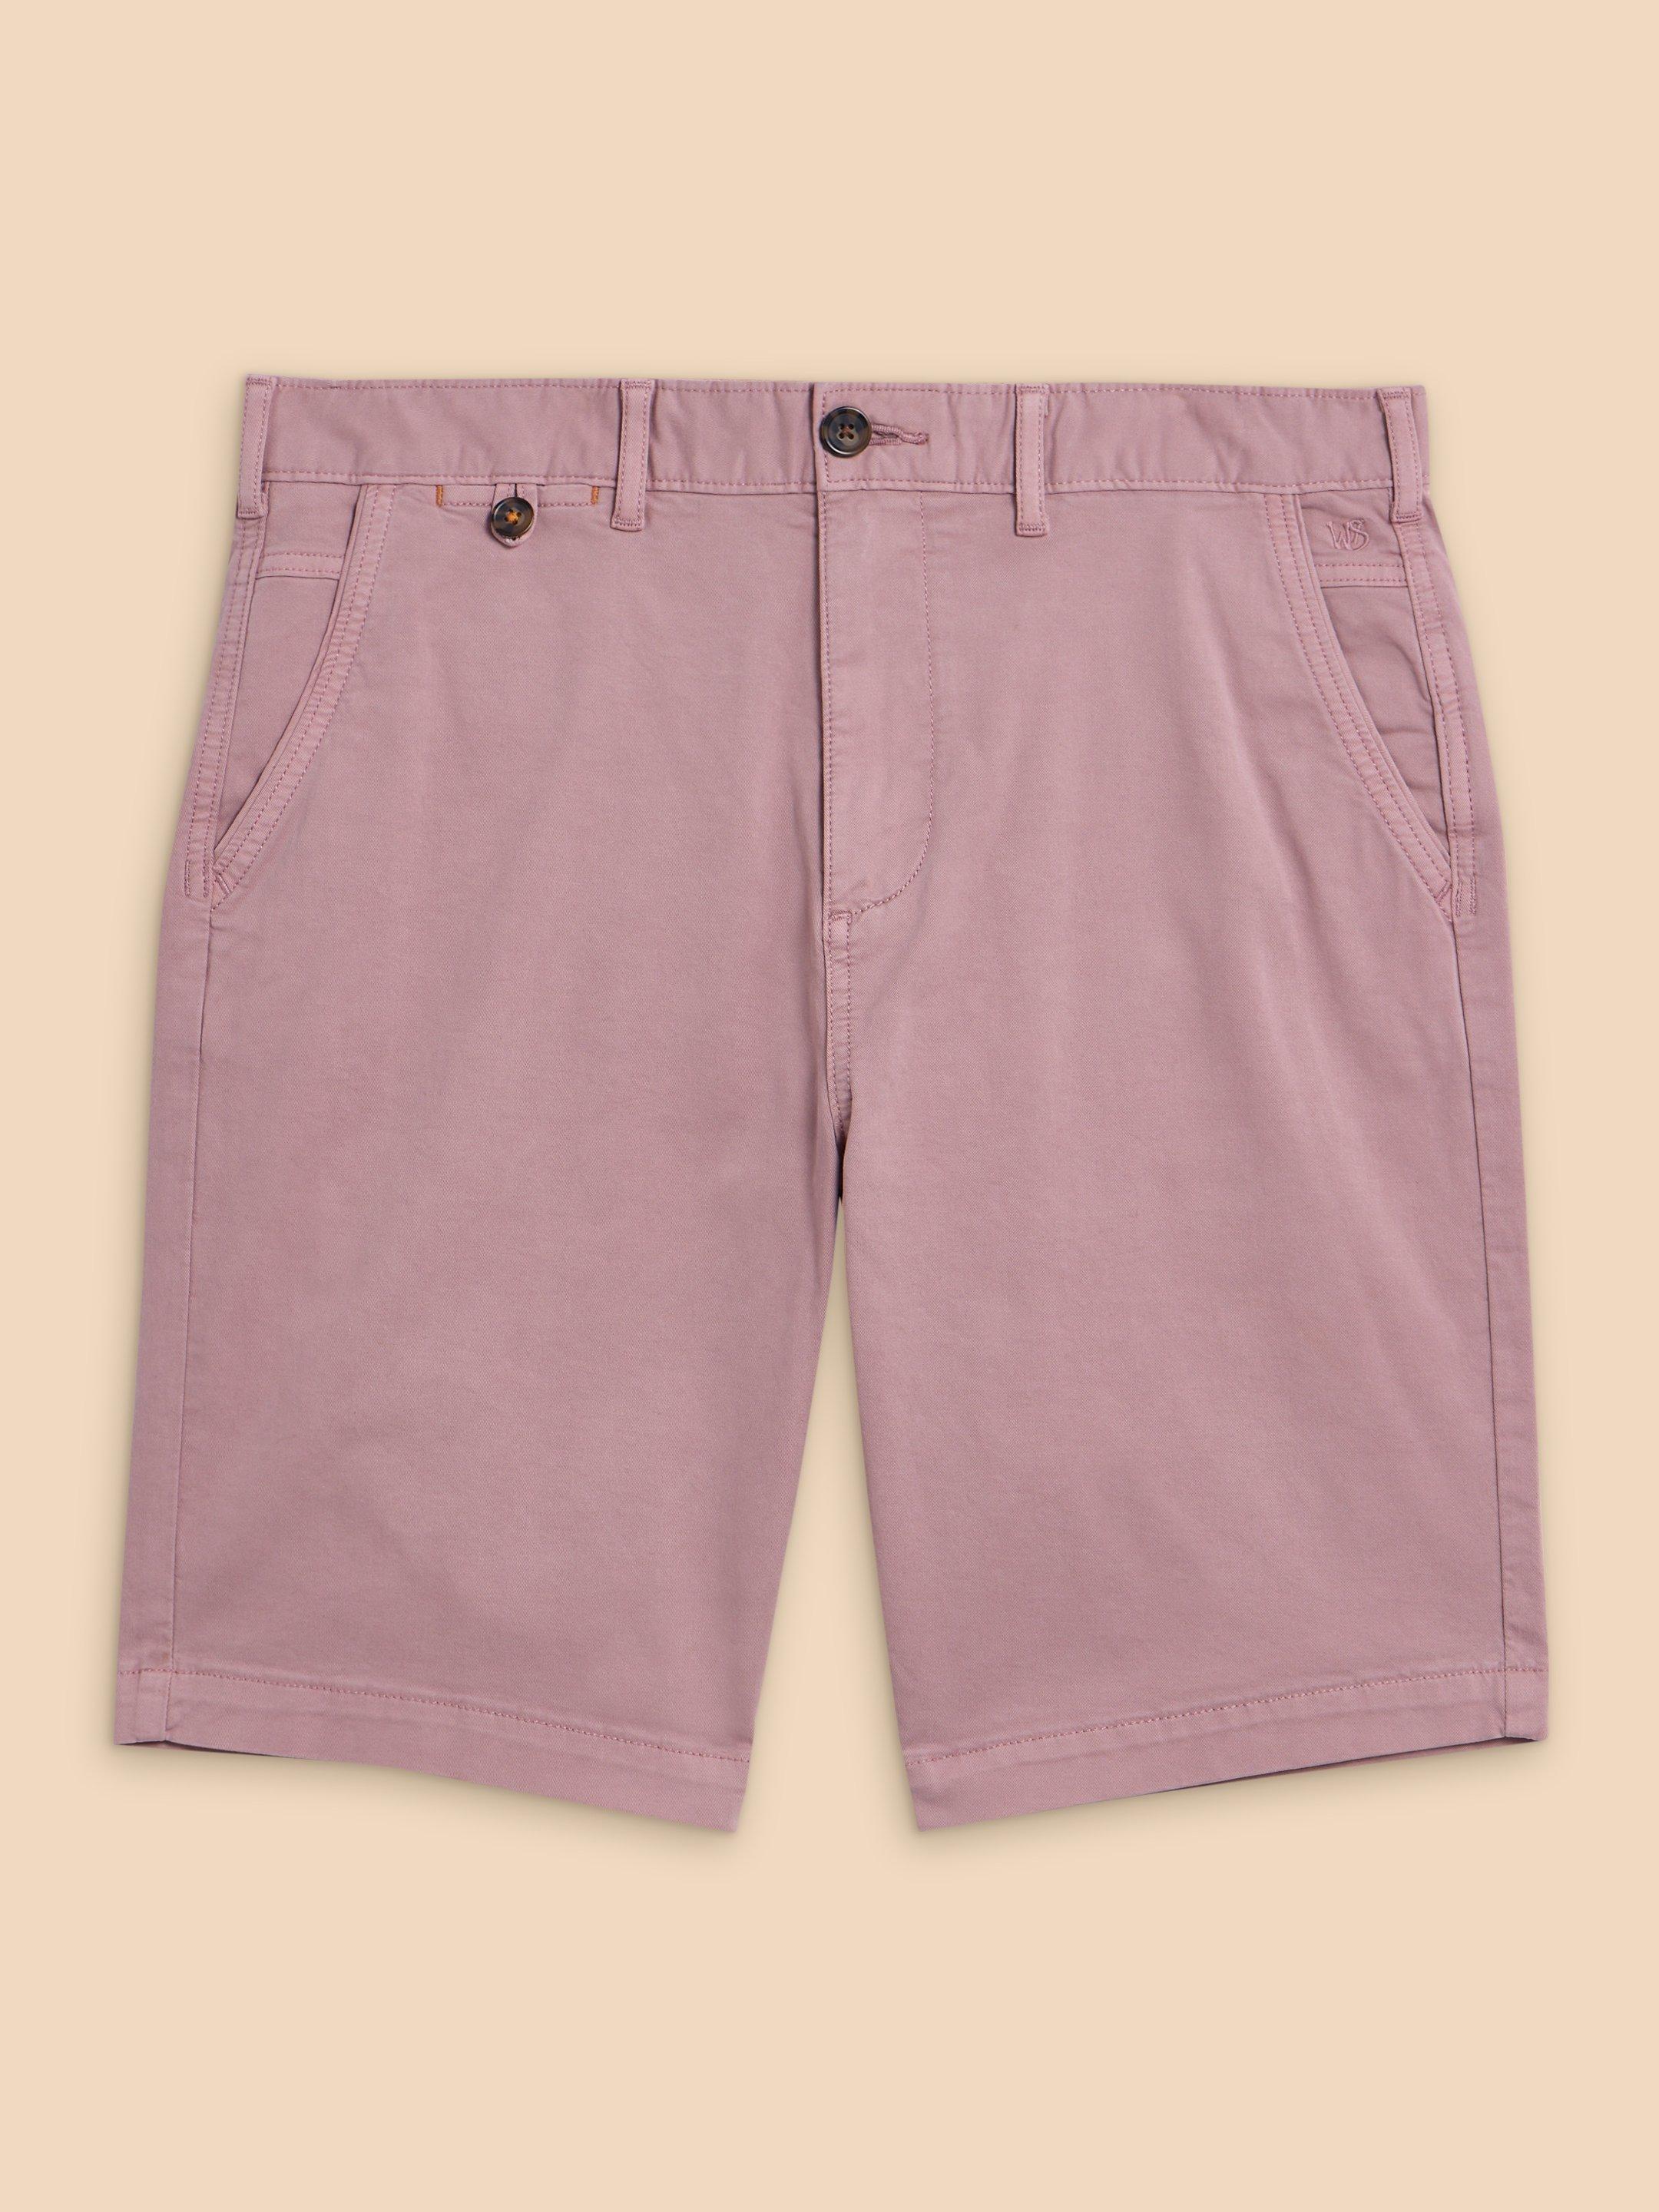 Sutton Organic Chino Short in DUS PINK - FLAT FRONT